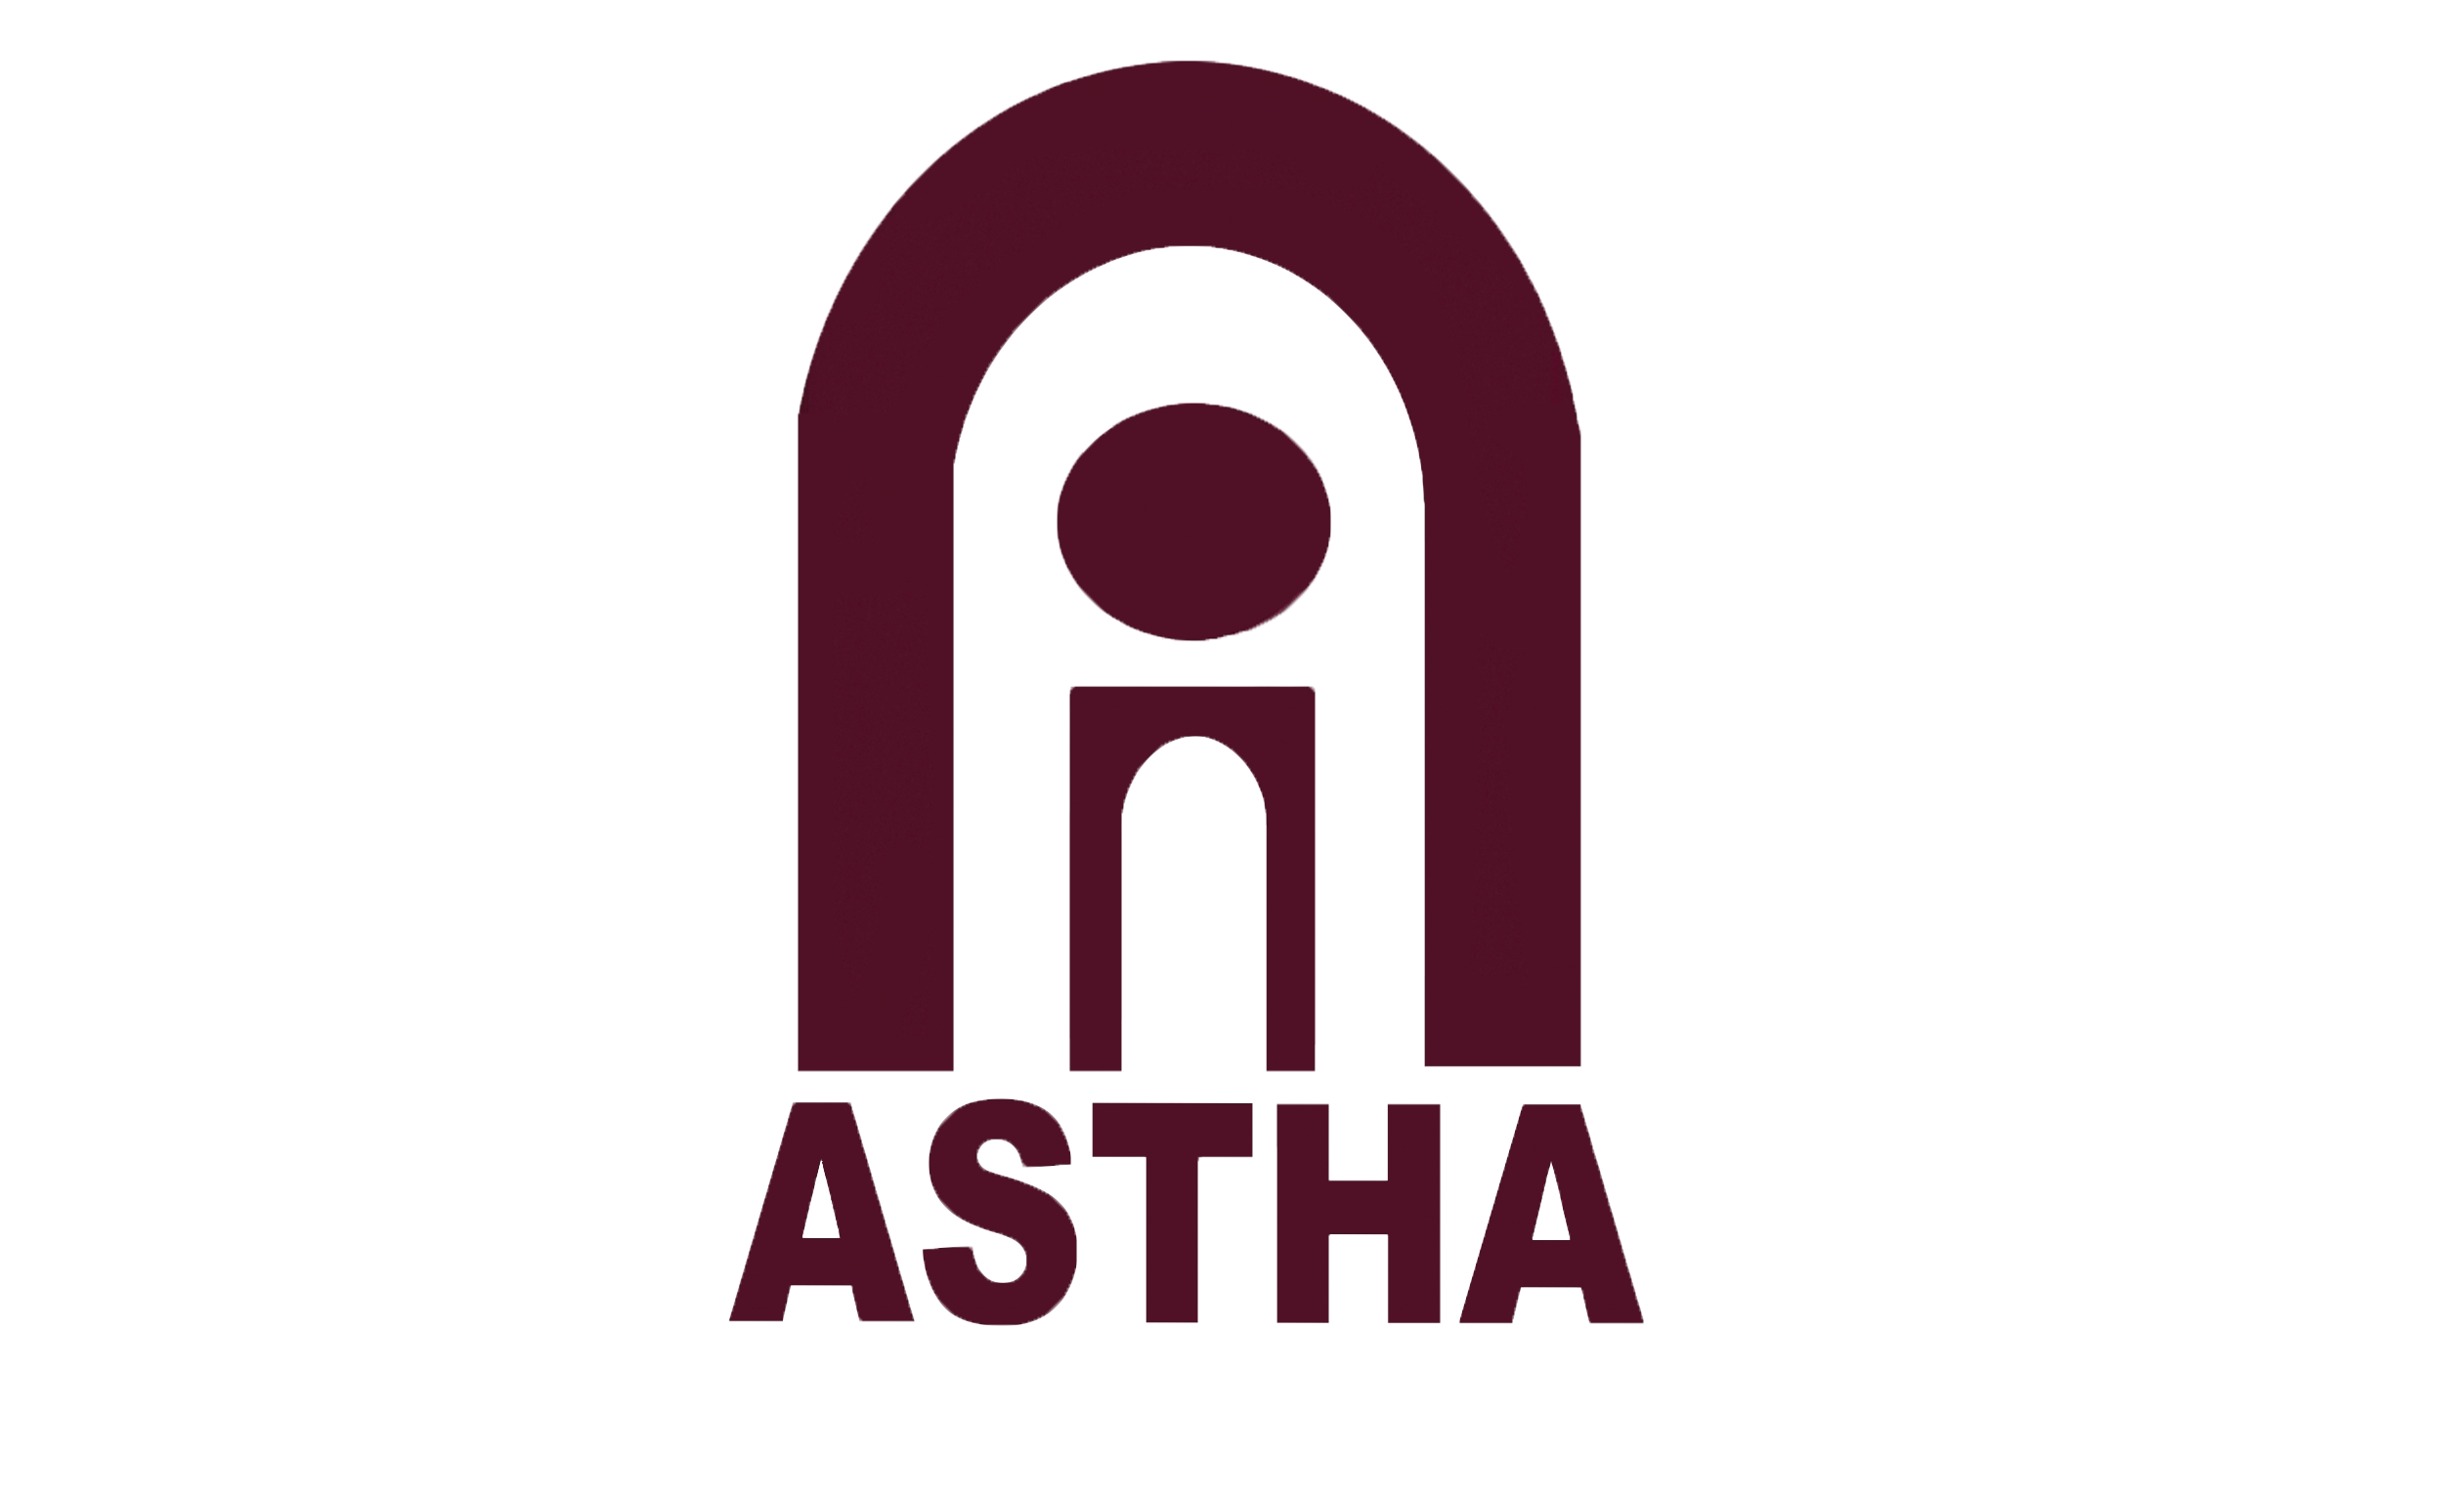 ASTHA (Alternate Strategies for the Handicapped)